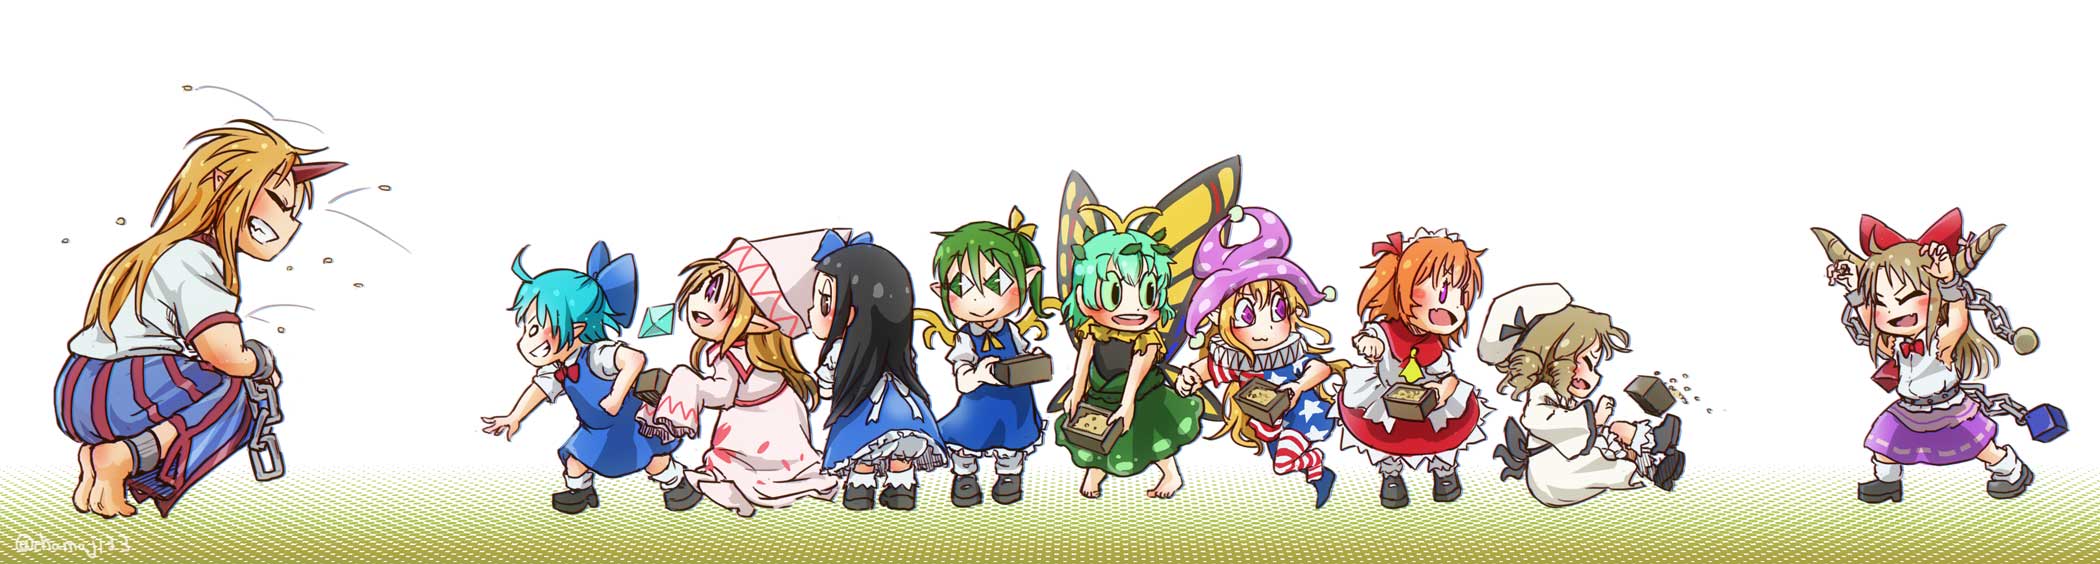 Anime Touhou Picture by chamaji